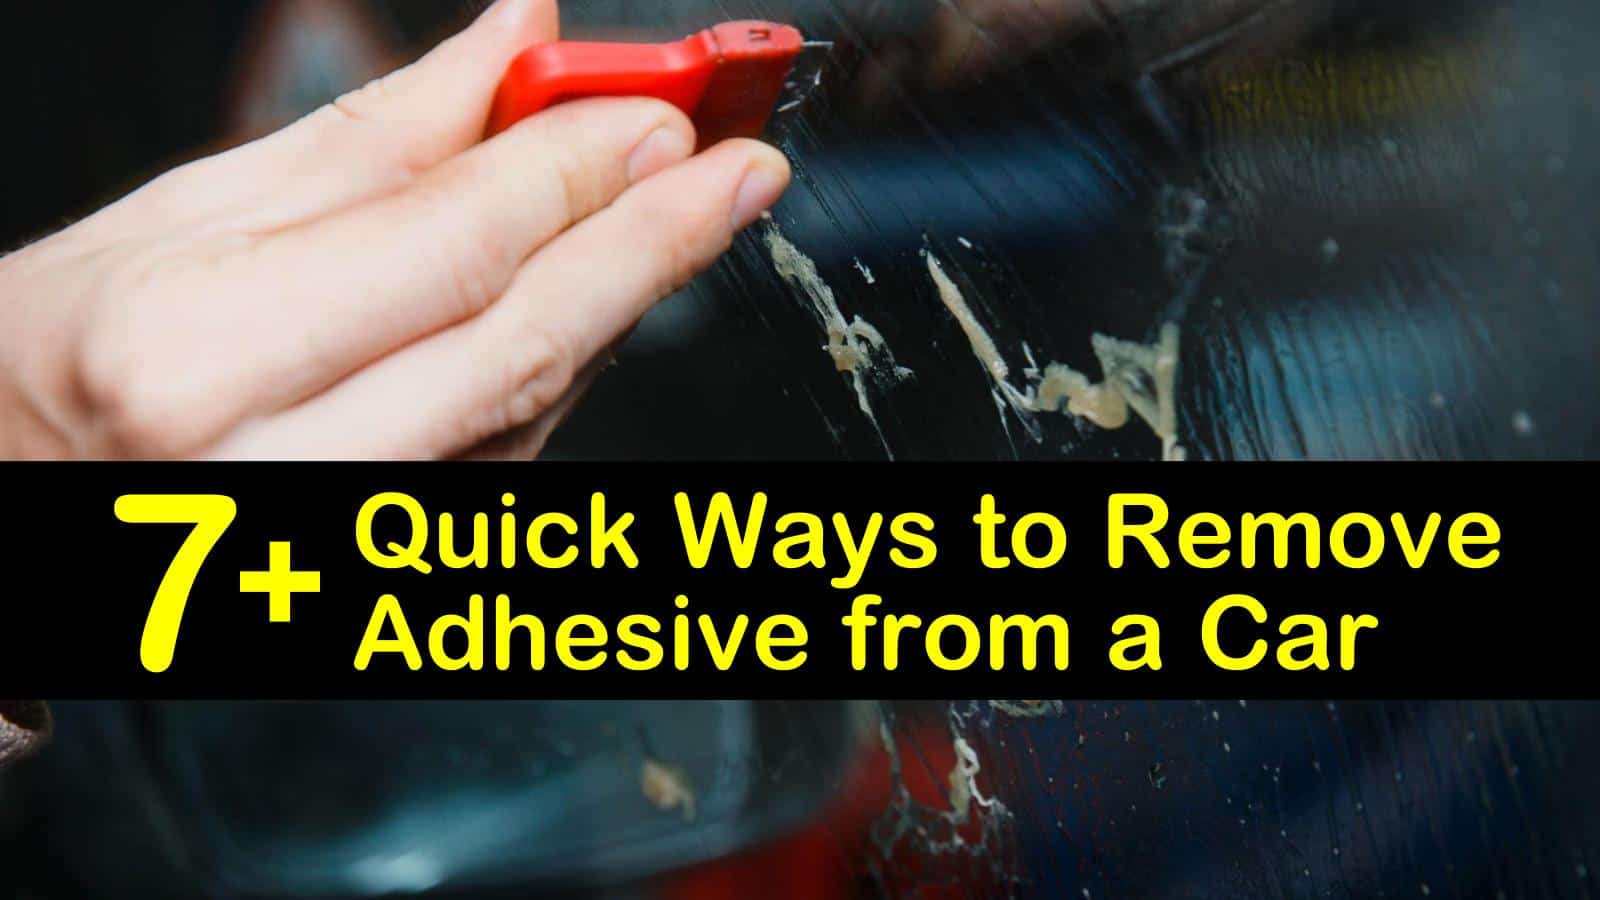 how to remove adhesive from a car titleimg1